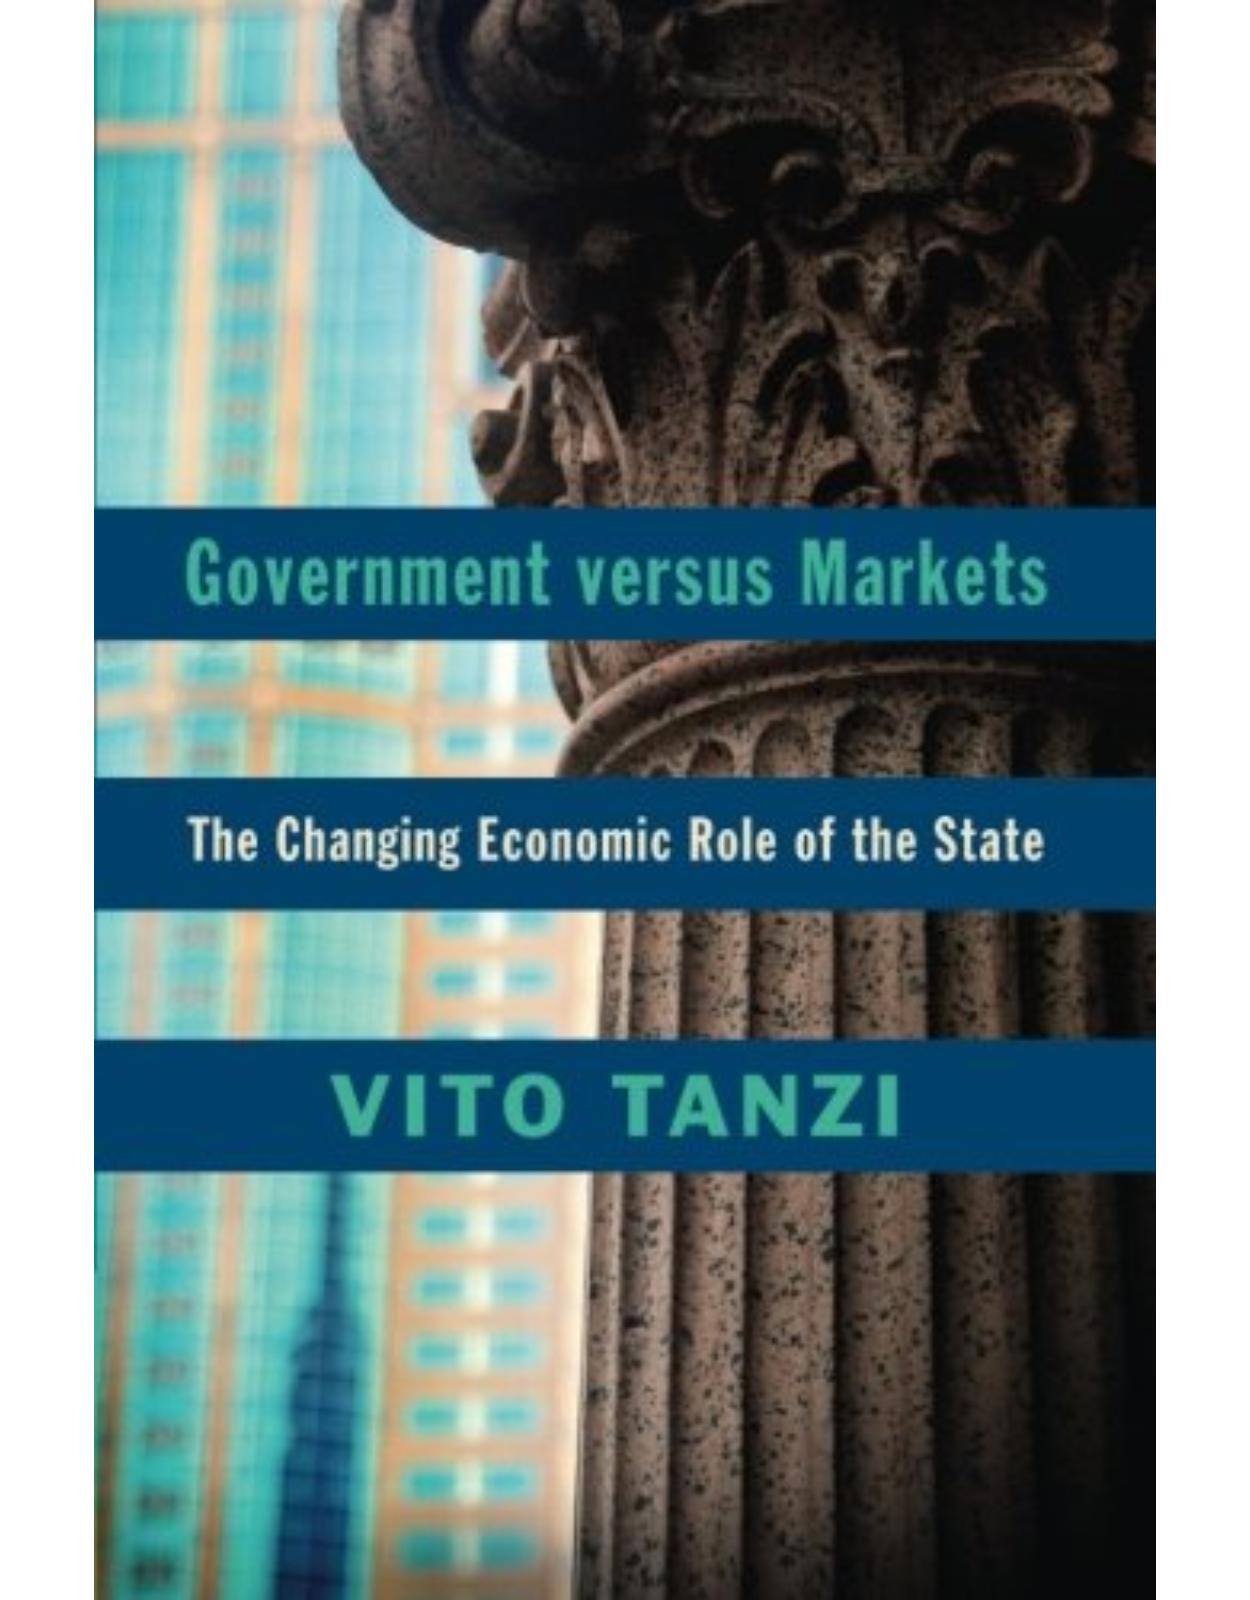 Government versus Markets: The Changing Economic Role of the State